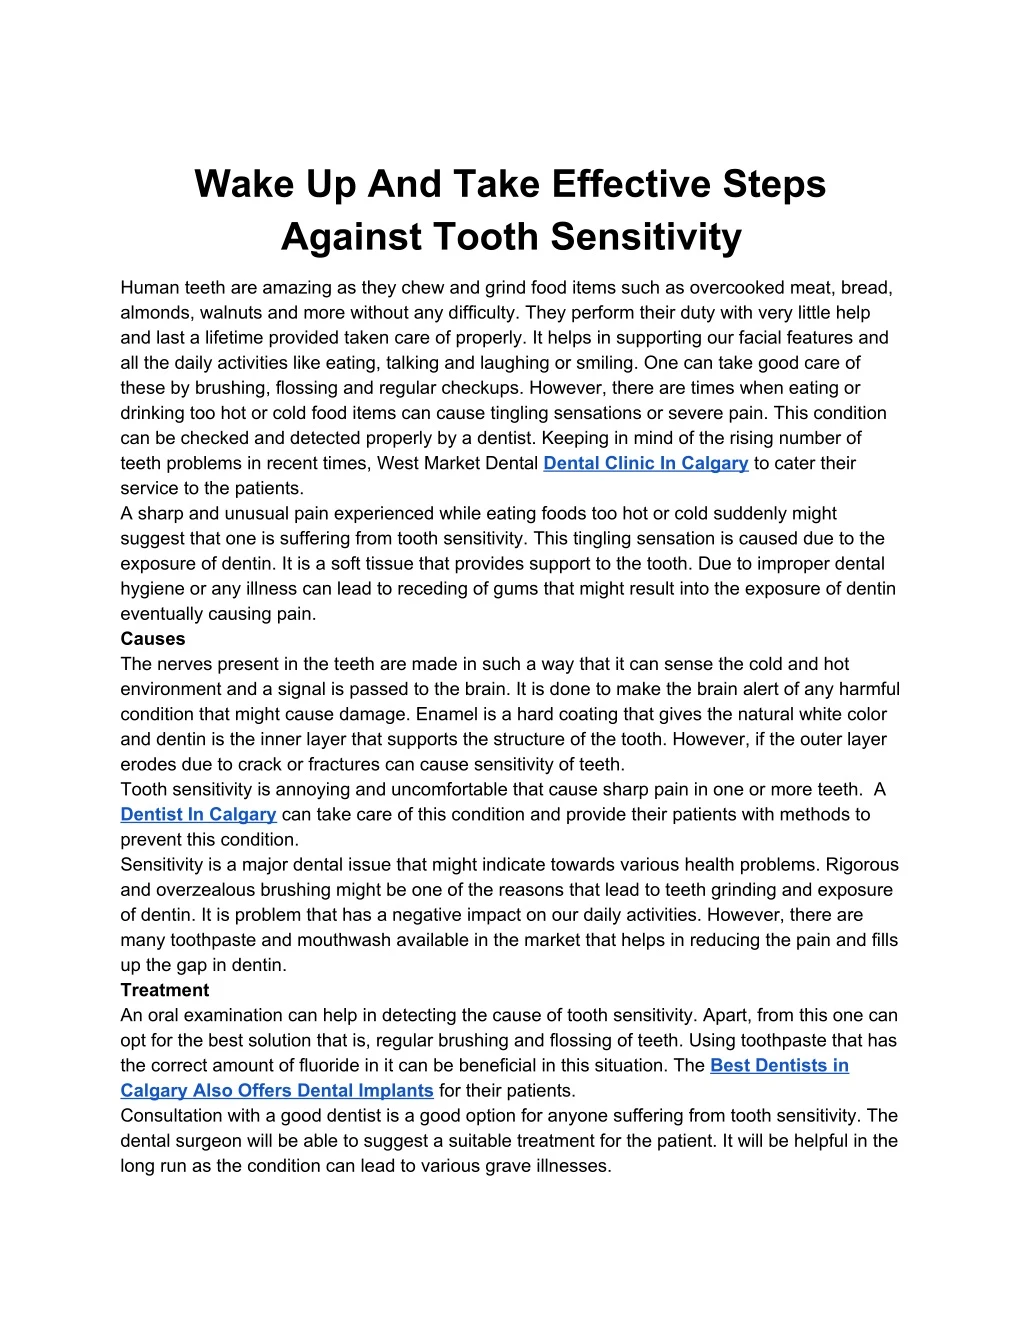 wake up and take effective steps against tooth